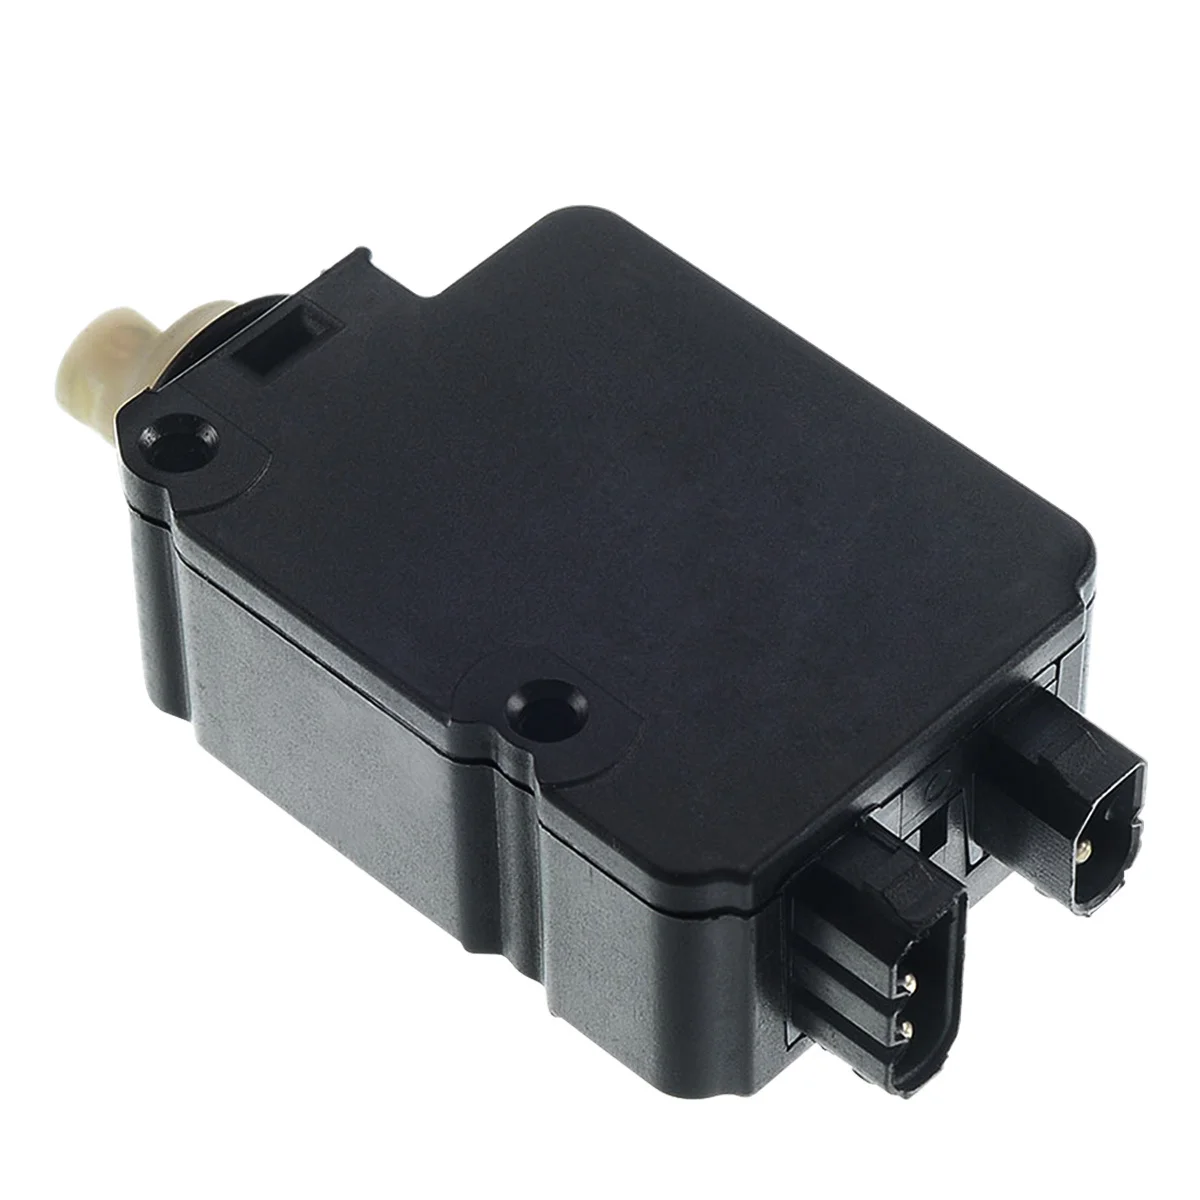 

A3 Automobile In-stock CN US GMR Door Lock Actuator Rear Trunk for BMW E36 3 Series 318i E34 525iT Z3 M3 746-505